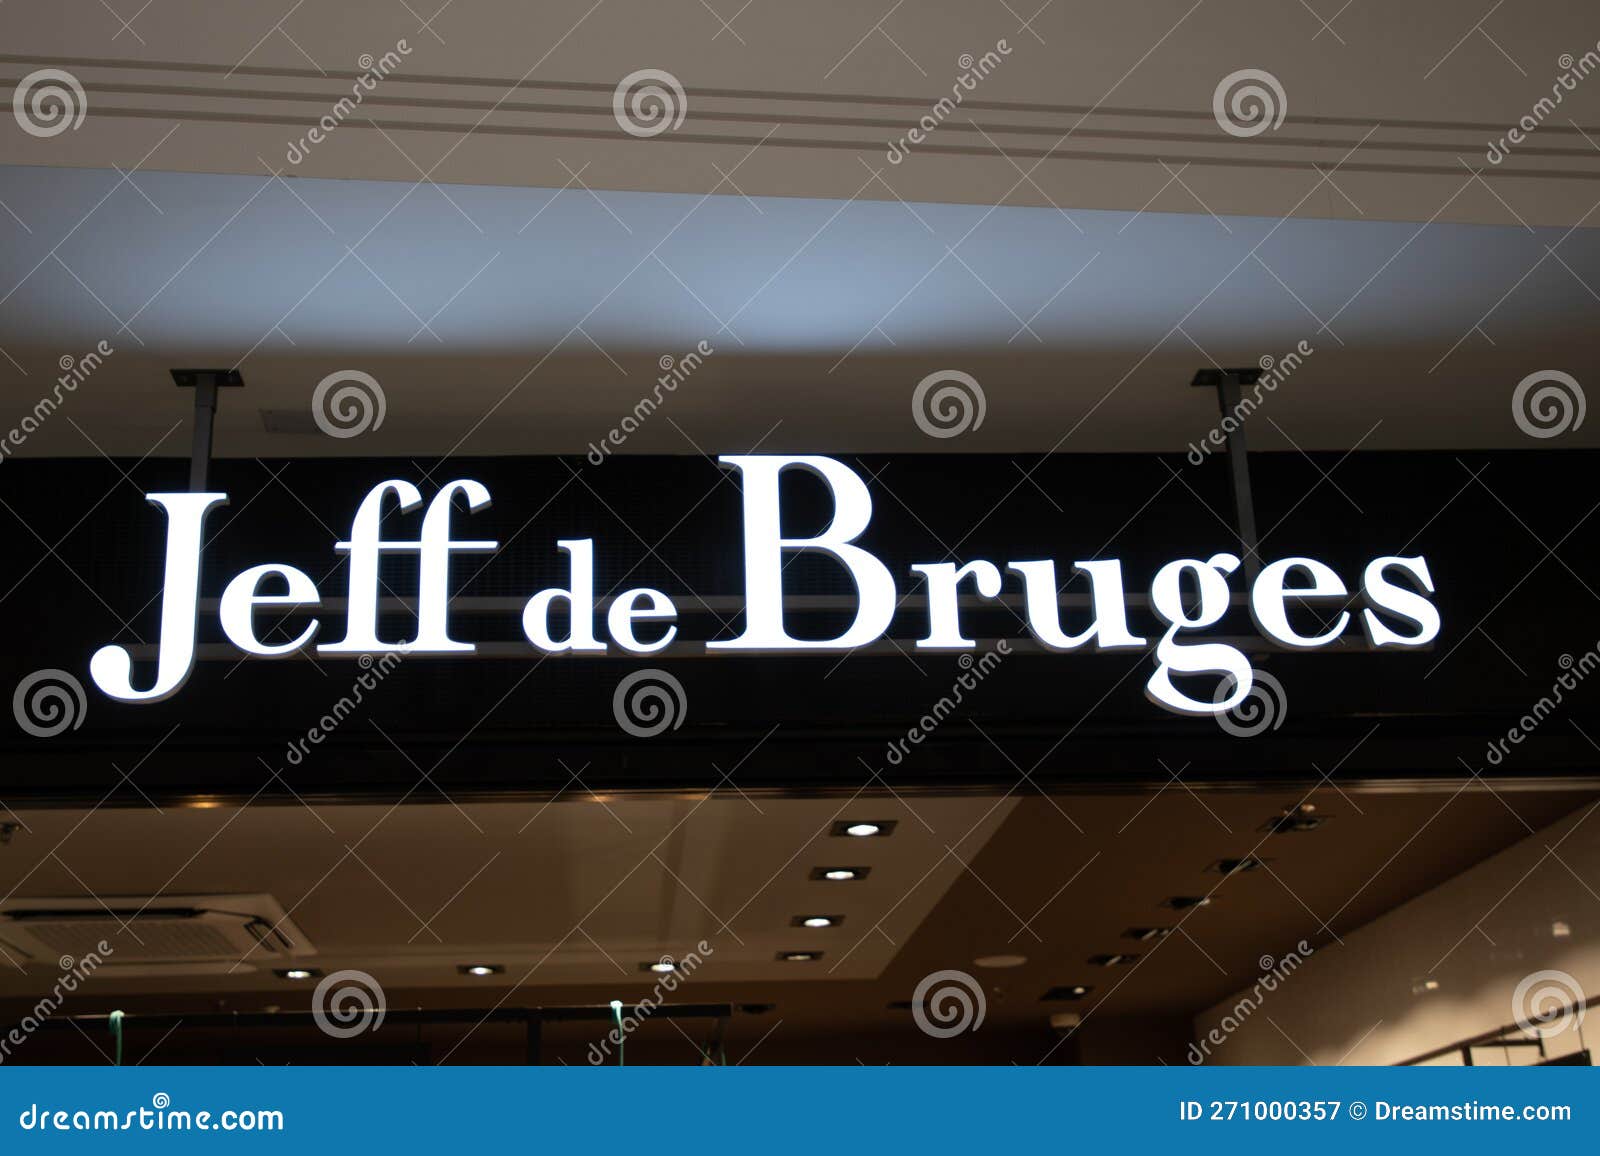 Jeff De Bruges Logo Brand and Text Sign Front Facade Store Chocolaterie ...